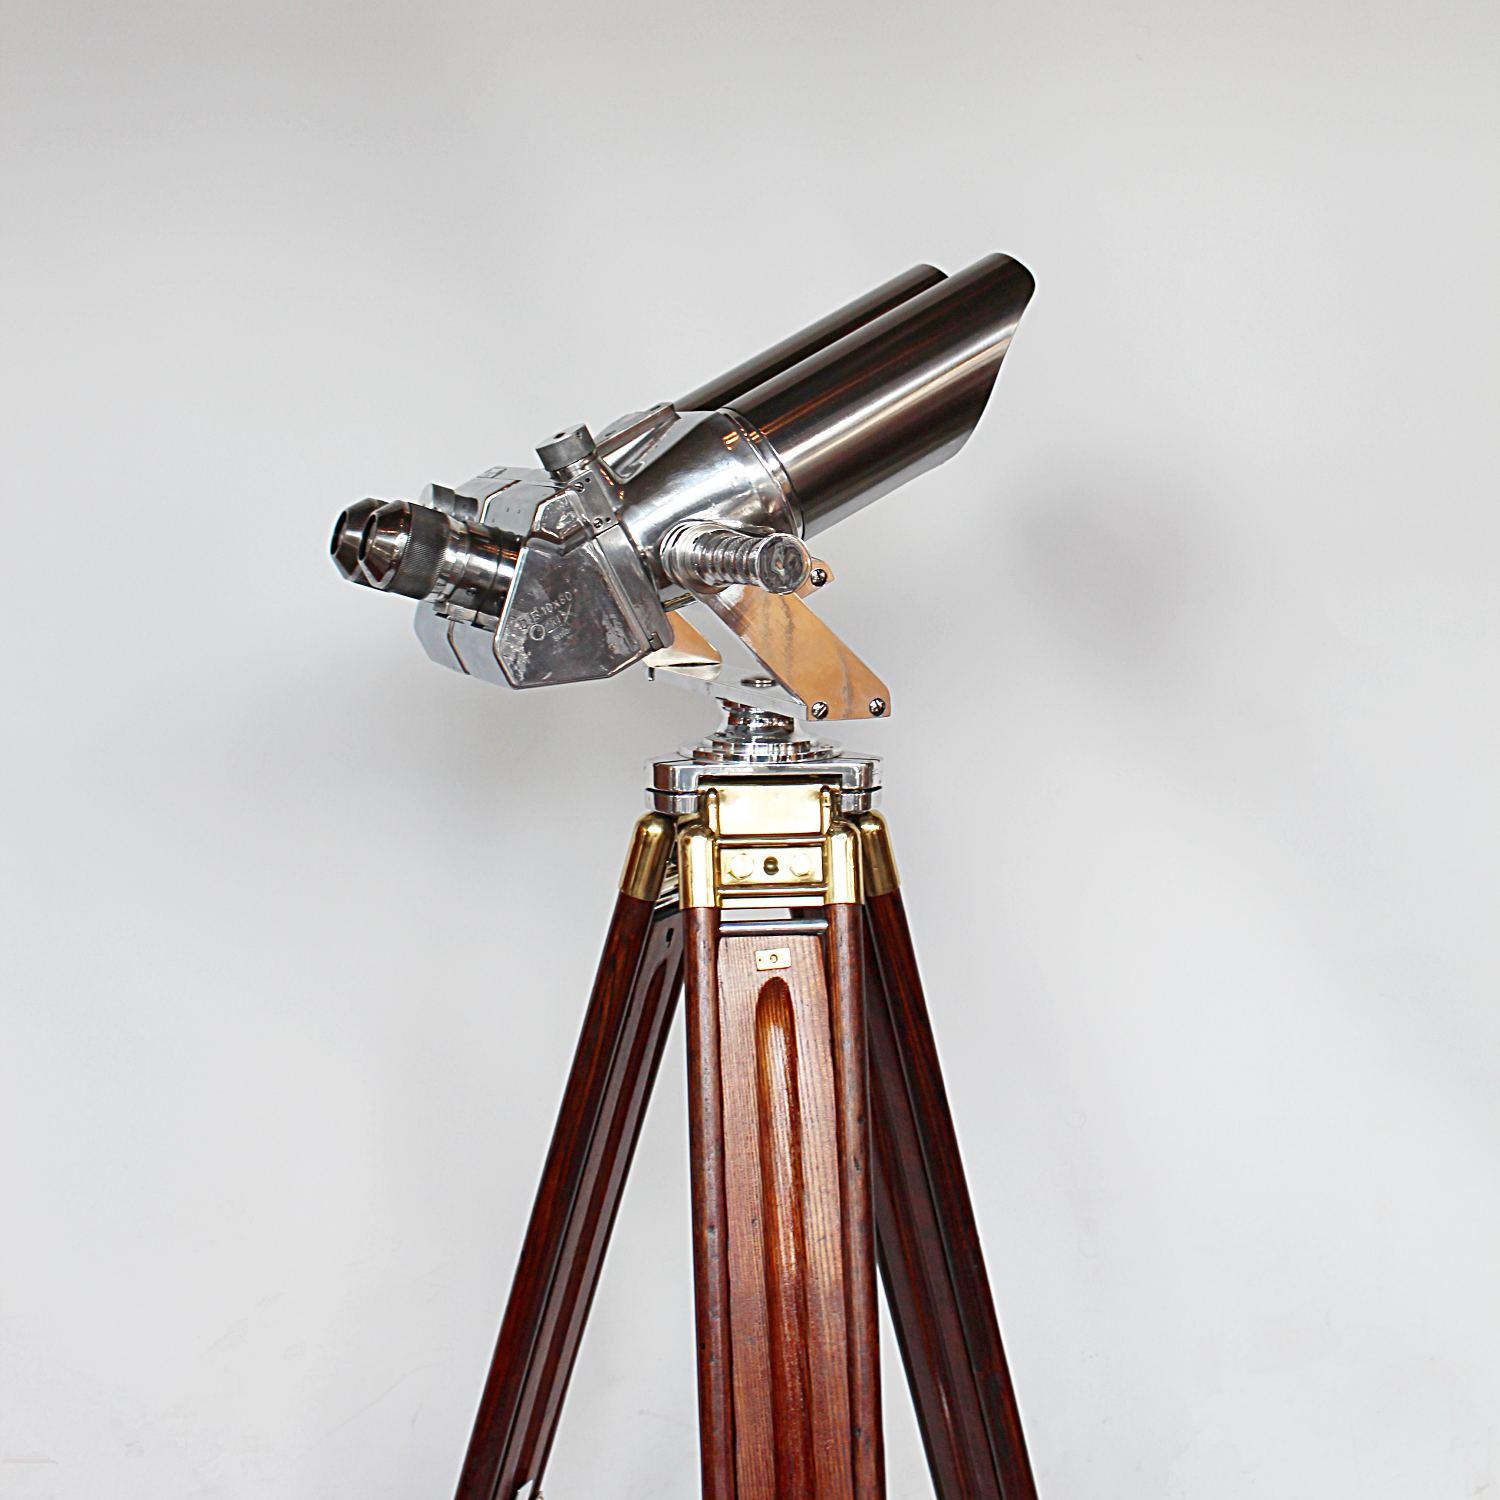 A pair of 10 x 80 binoculars with eyeglasses set at 45 degrees, attributed to Zeiss. Set on period, extending oak and brass stand with chromed, conical feet. 10 times magnification with 80mm objective lens.

Paint stripped and metal polished.